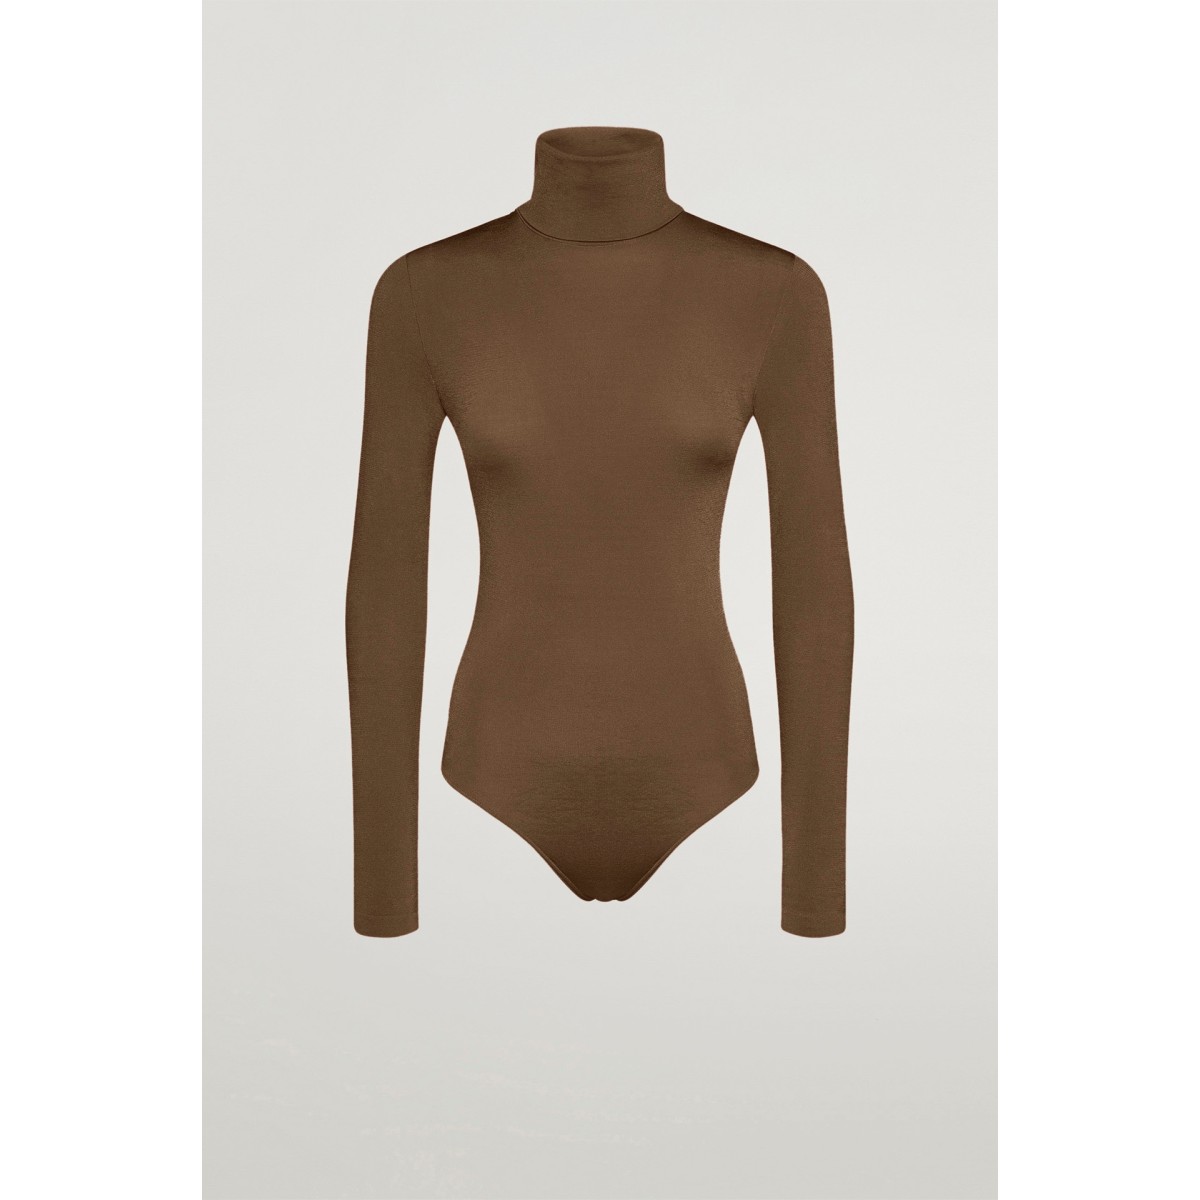 Wolford body suit long - Gem